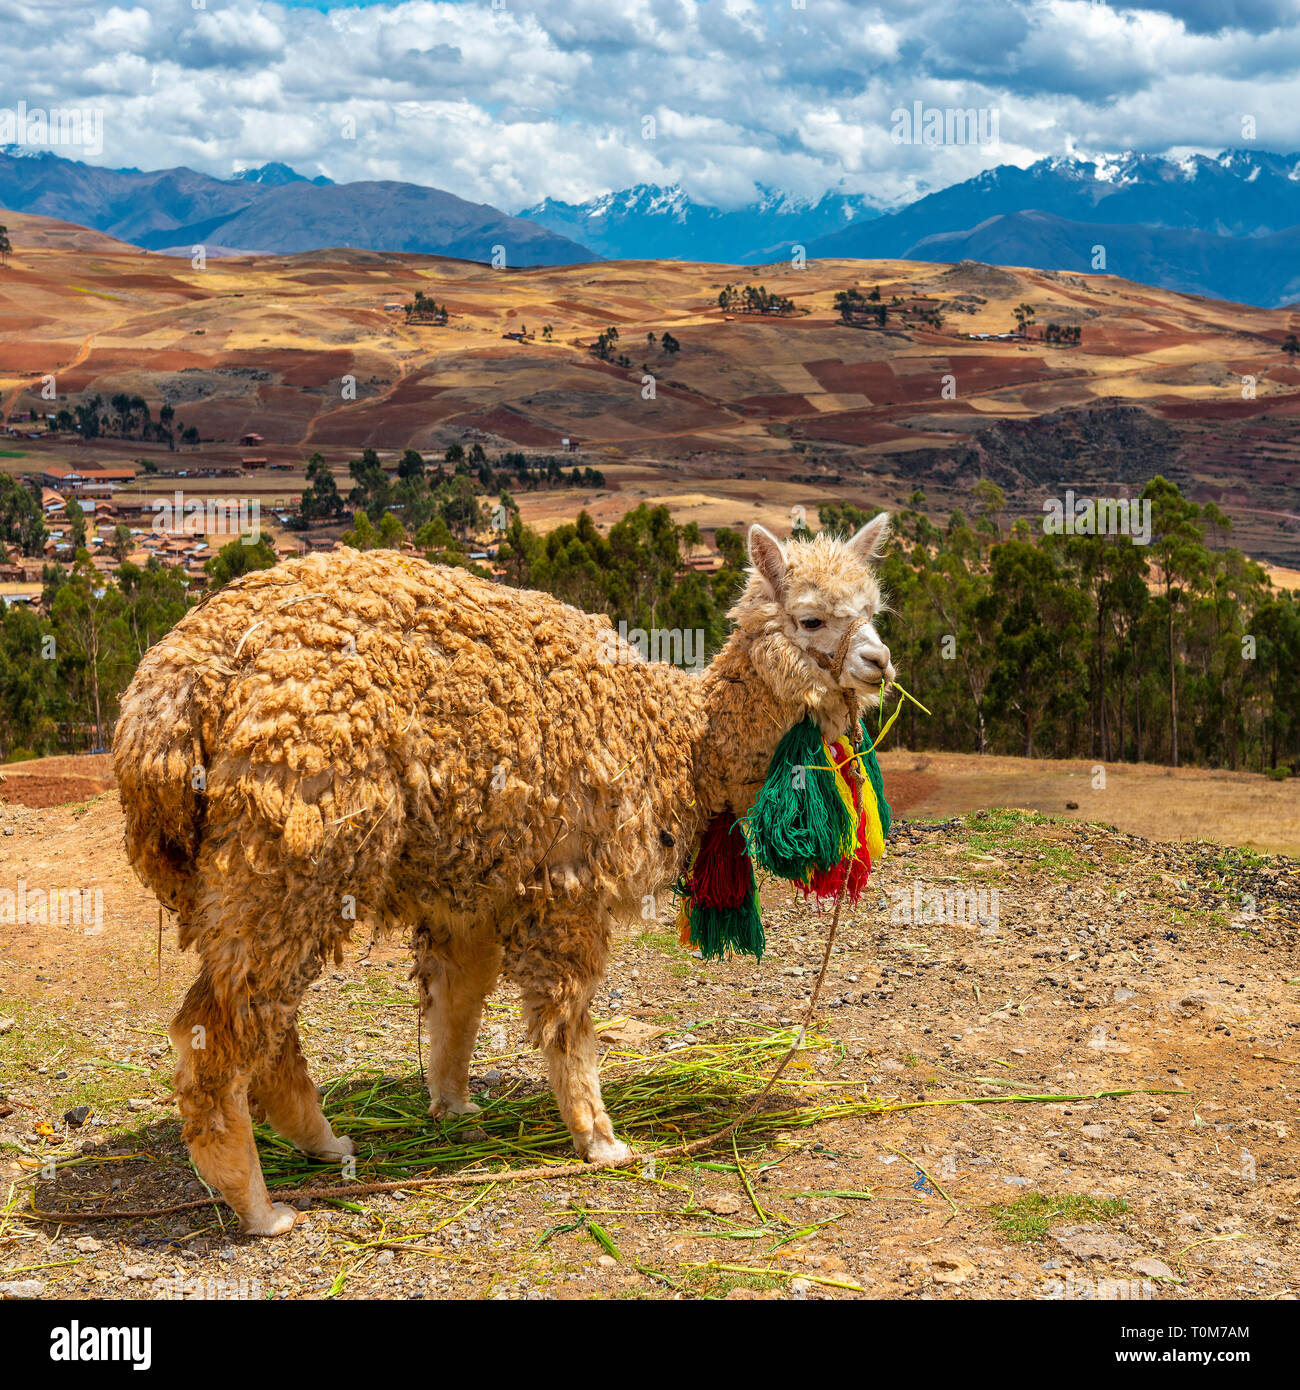 Portrait of a llama (lama glama) in the Sacred Valley of the Inca with the Andes mountain range in the background, Cusco Province, Peru. Stock Photo